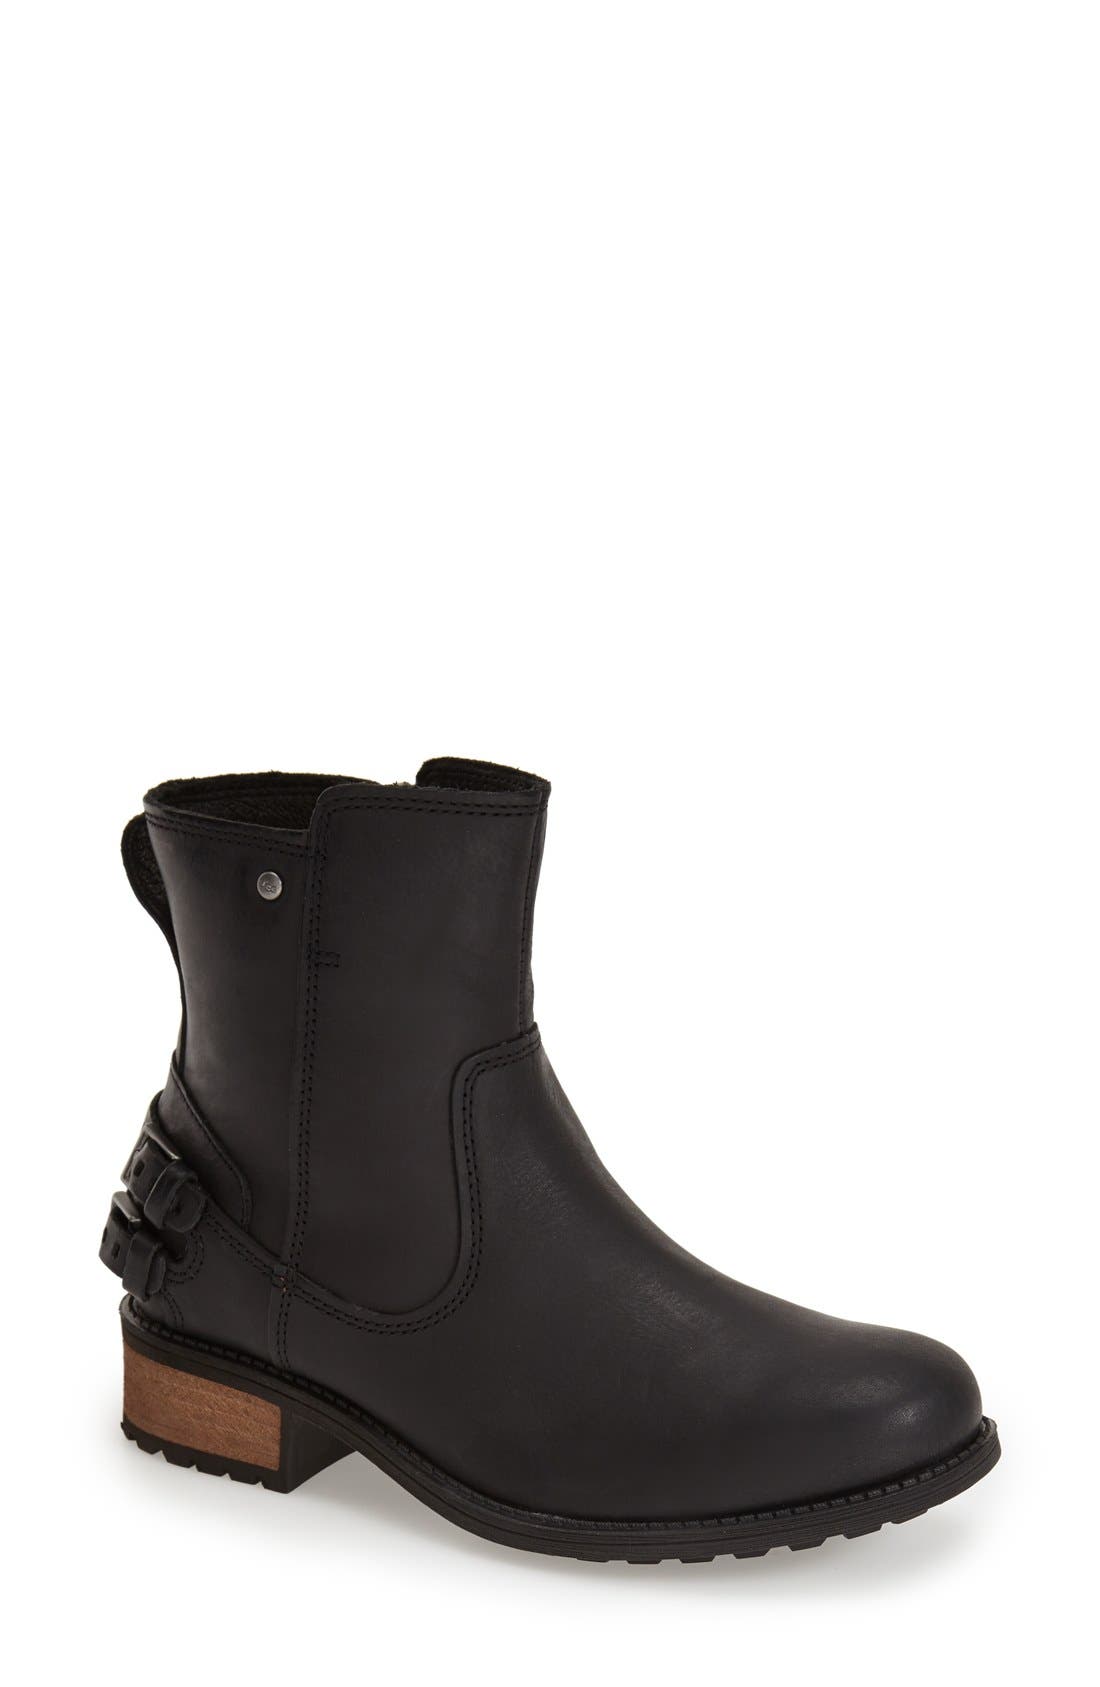 ugg orion boots brown